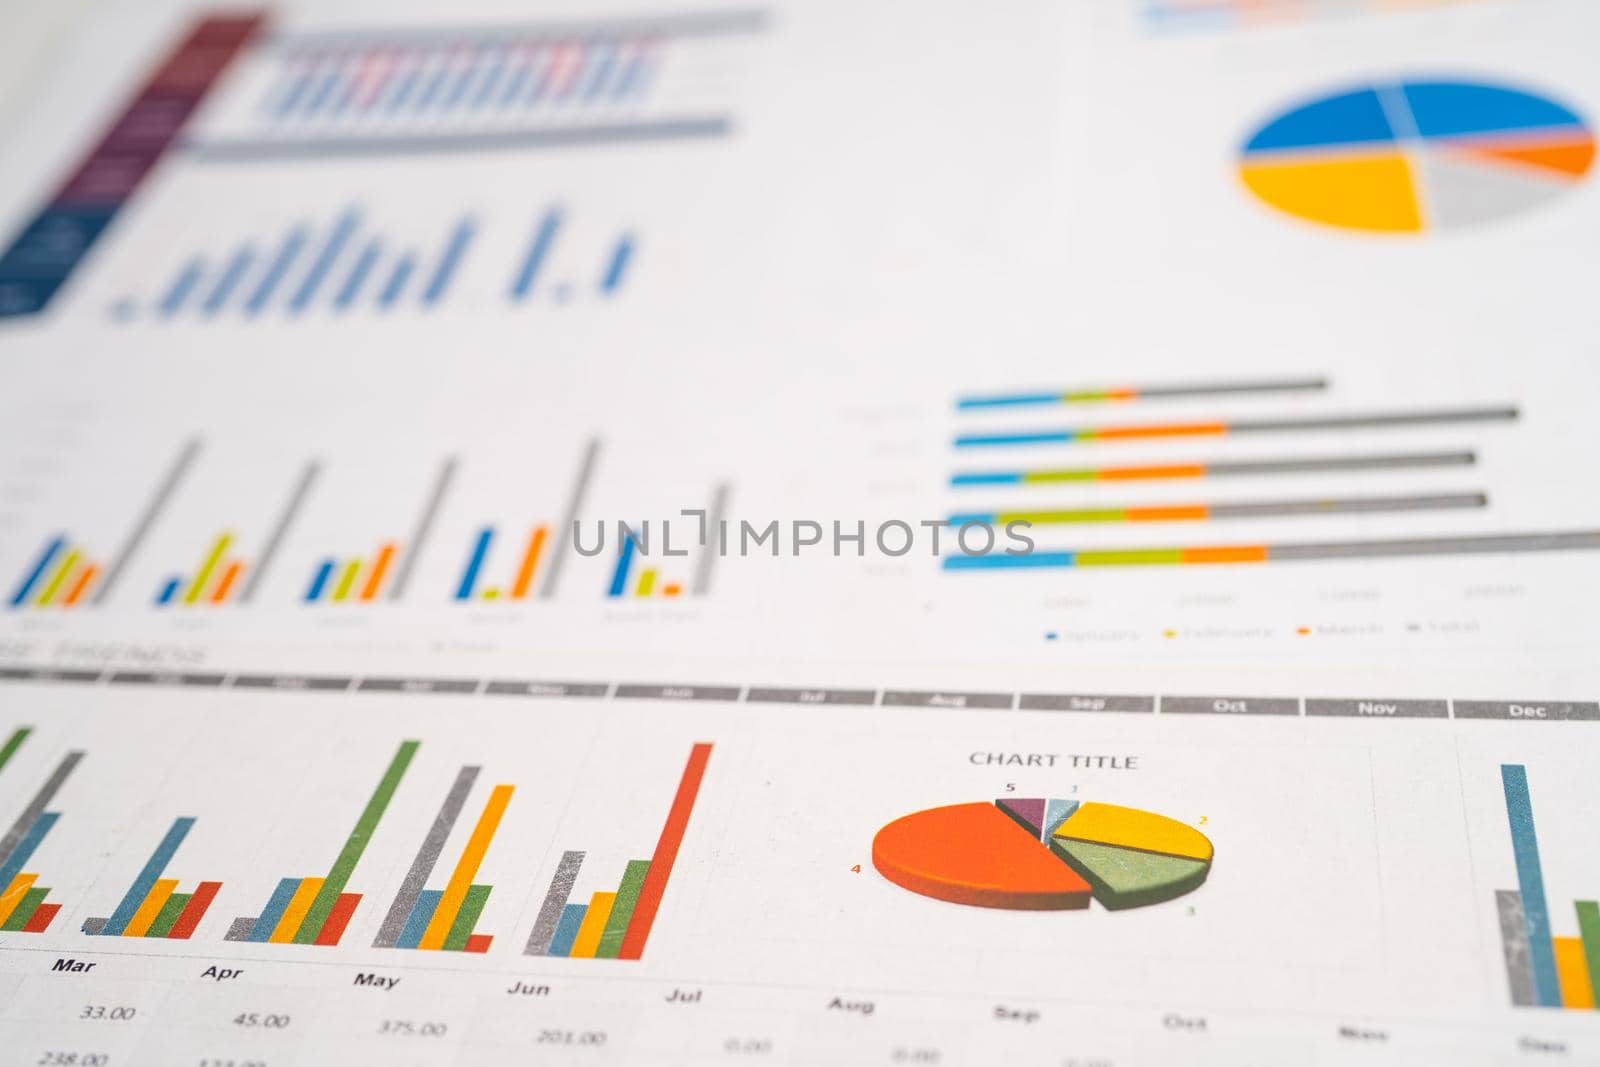 Charts Graphs paper. Financial development, Banking Account, Statistics, Investment Analytic research data economy, Stock exchange Business office company meeting concept. by pamai